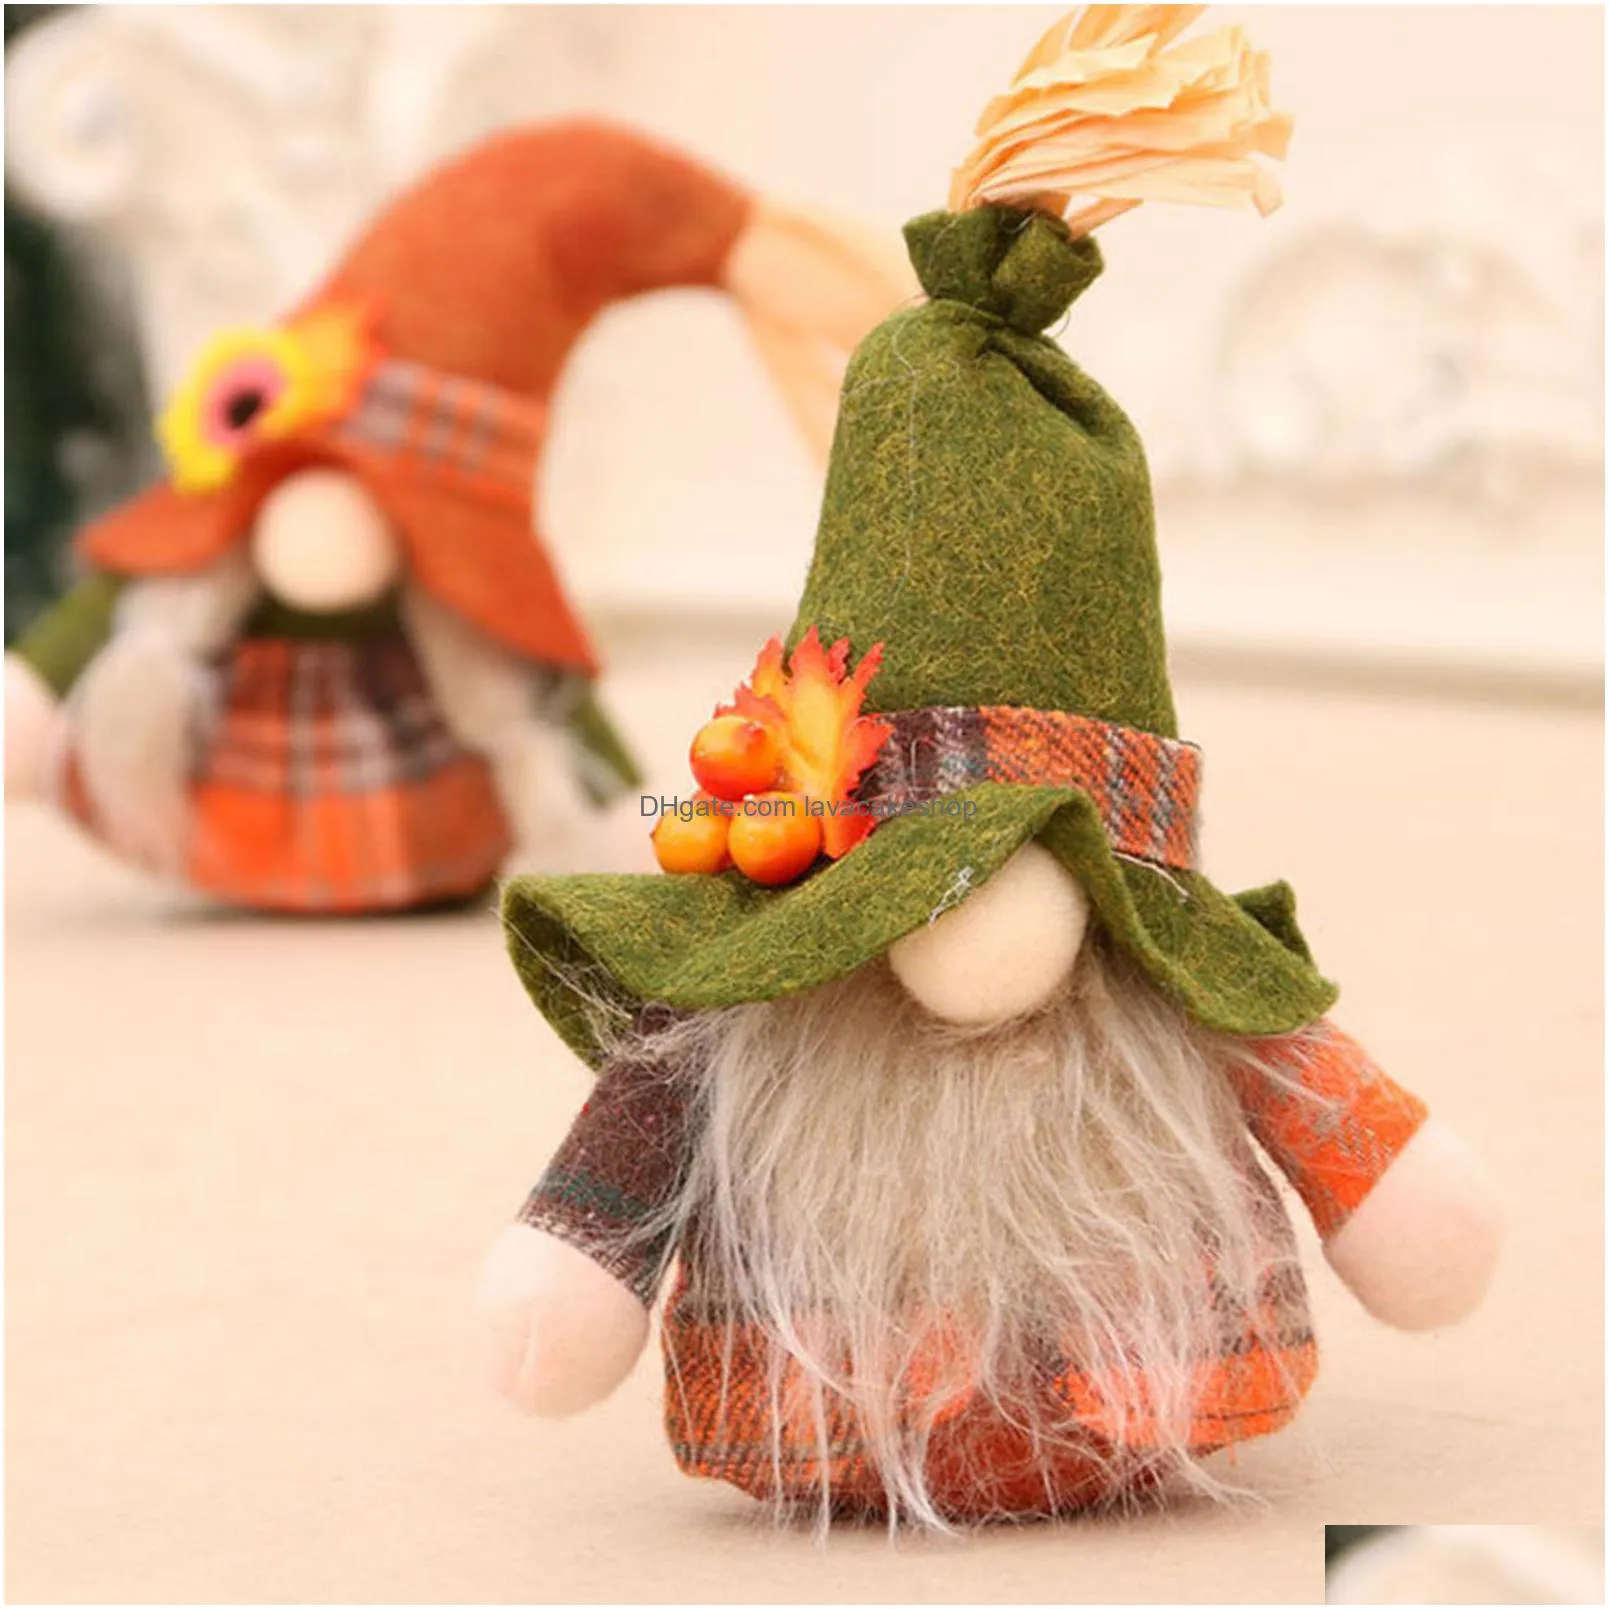 Fall Gnome Autumn Pumpkin Sunflower Swedish Dwarf Thanksgiving Day Gift Christmas Decor Ornaments Home Decorations Re Dhhdq